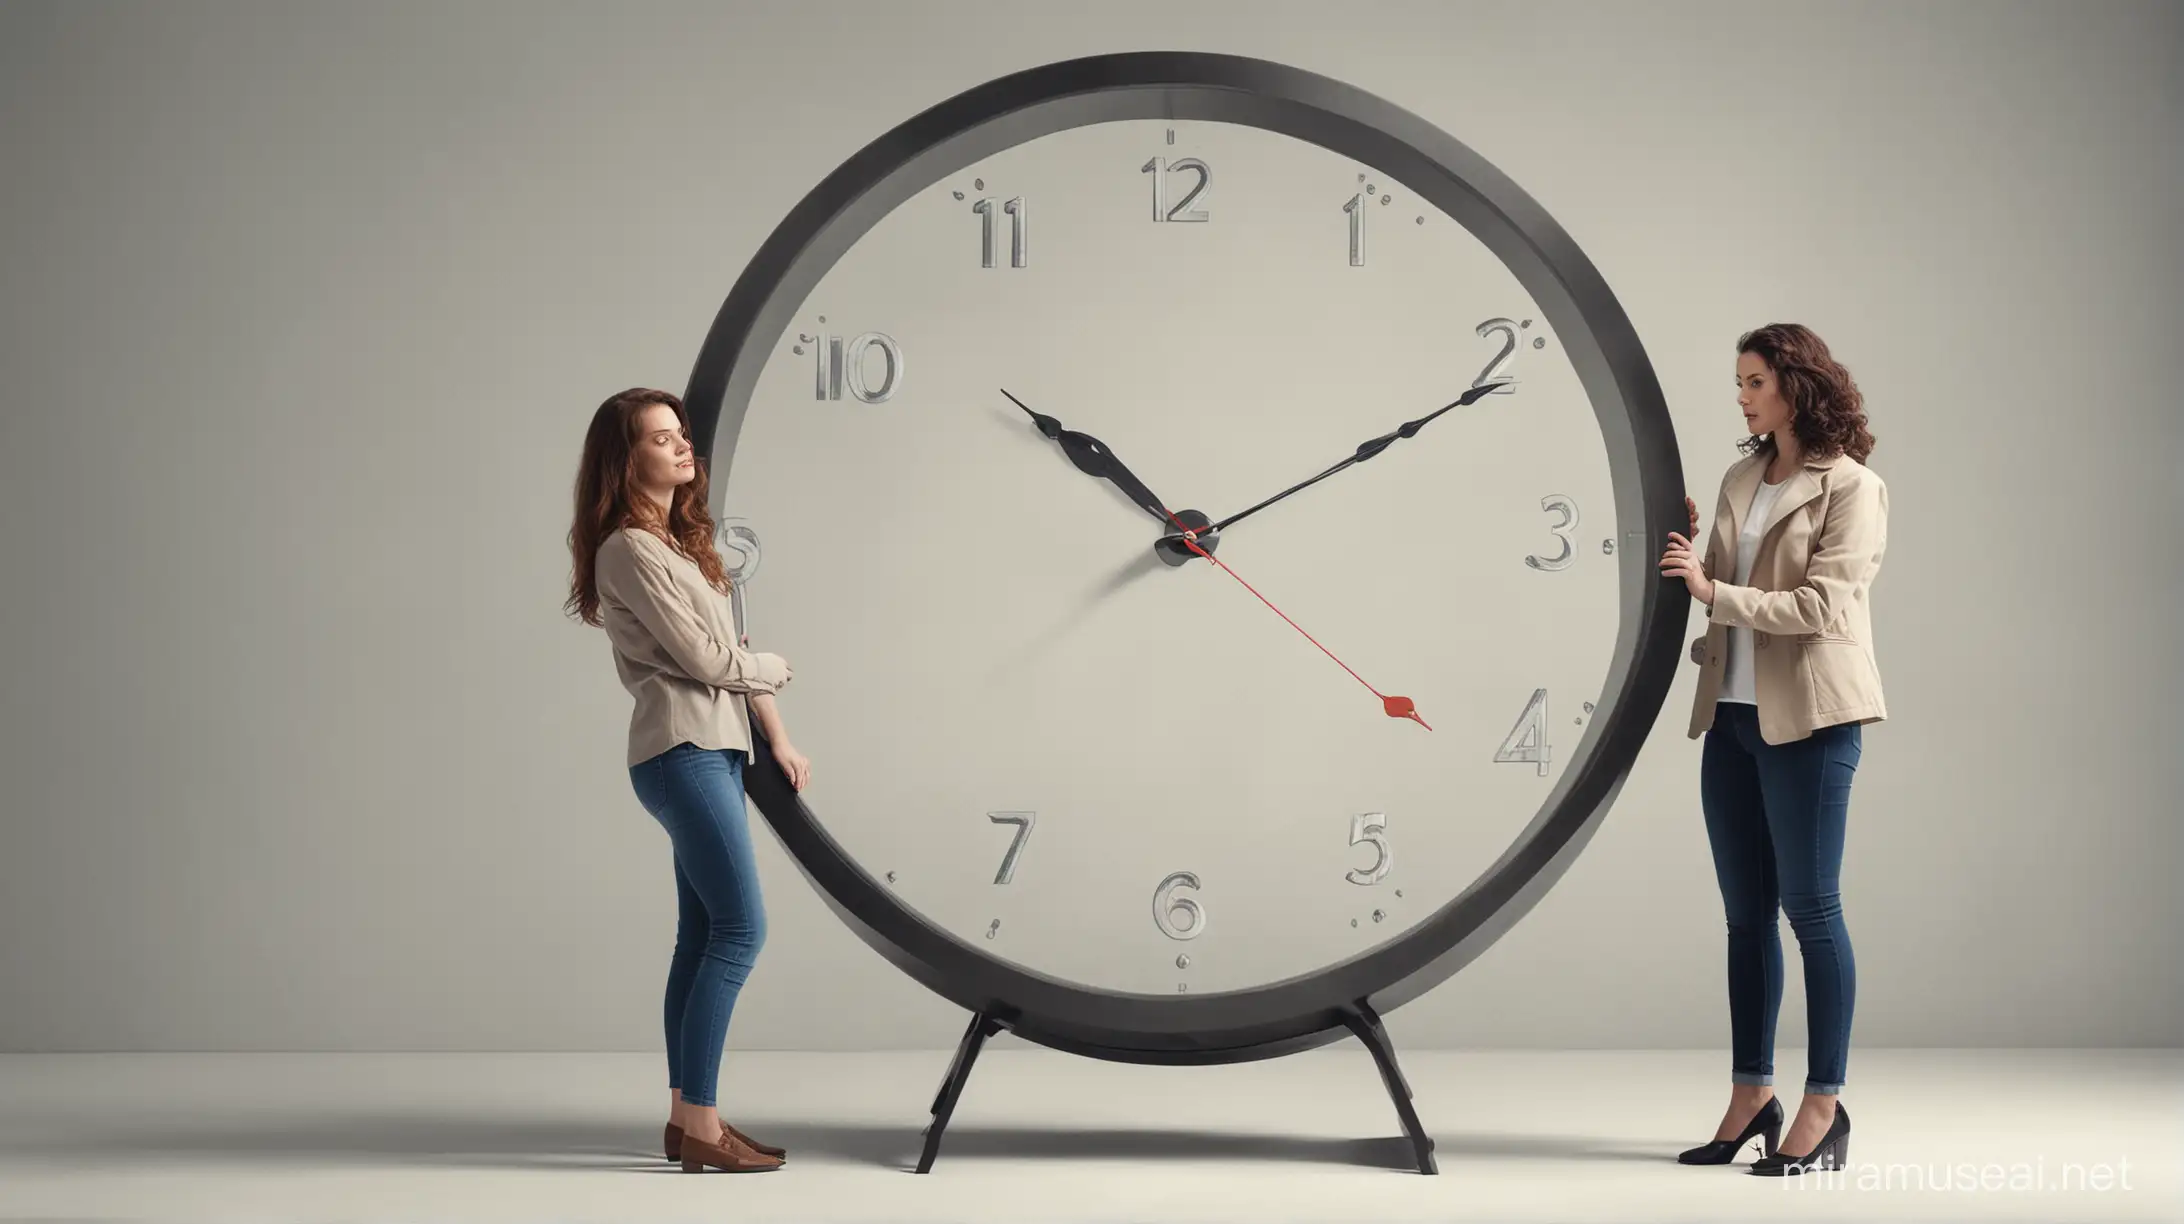 Two Women Standing by a Central Clock Illustrating Real Time